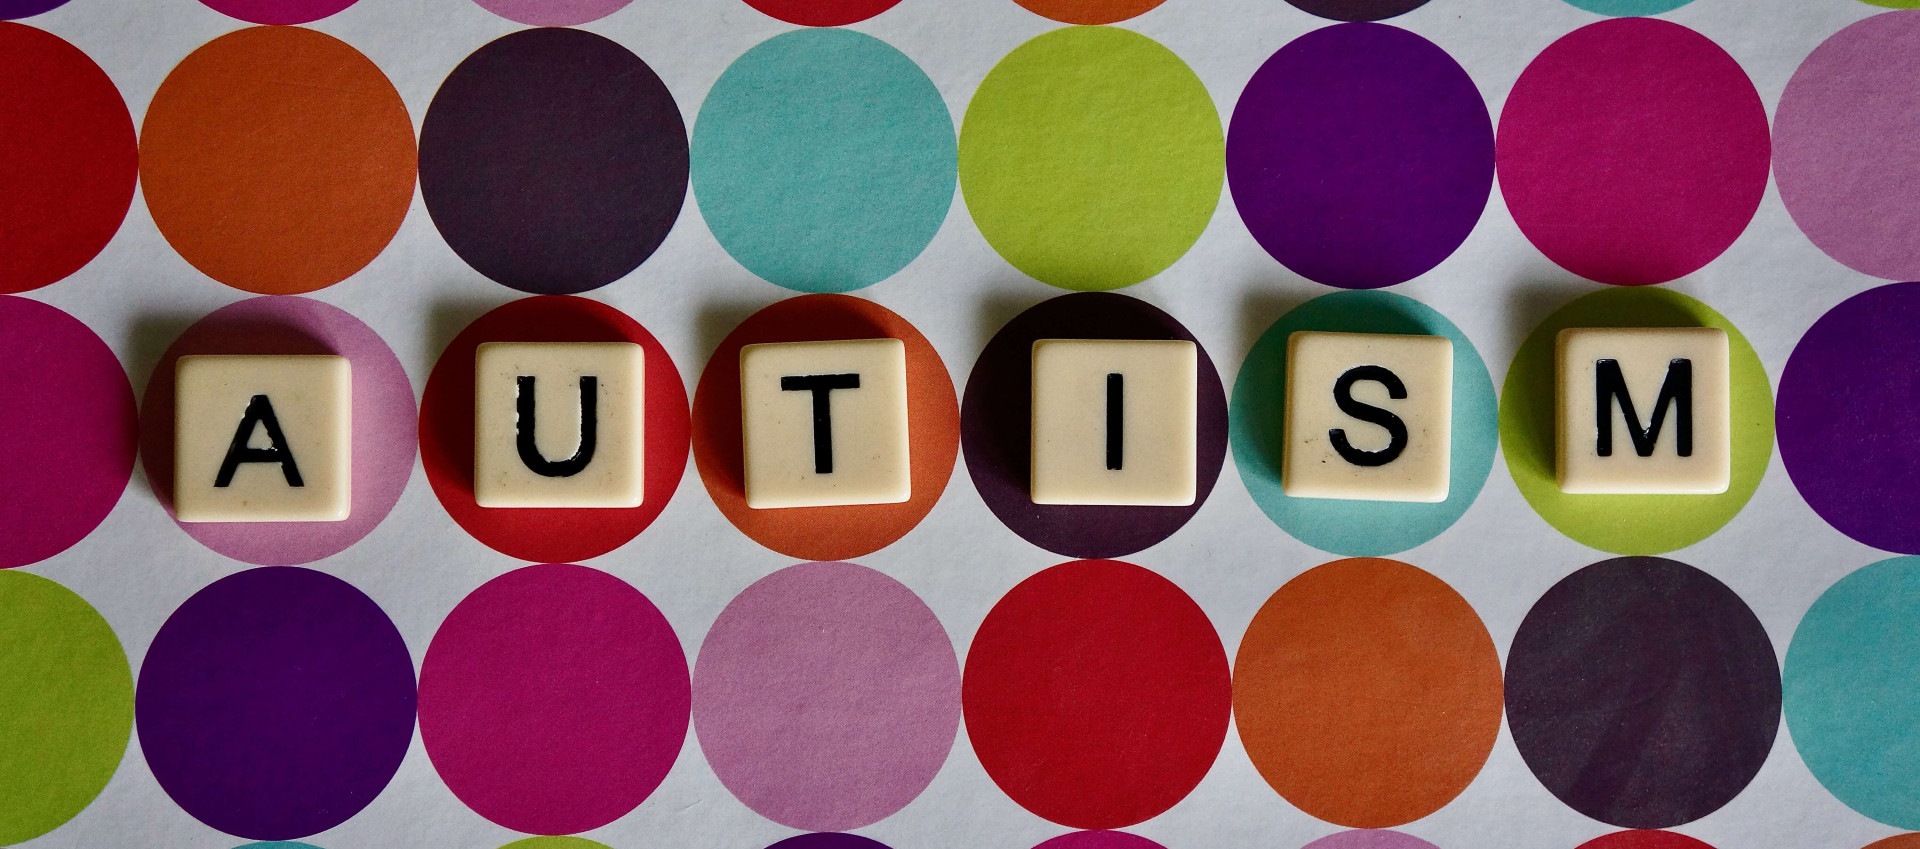 the word "autism" is spelled out using scrabble square pieces on a coloured background of circles